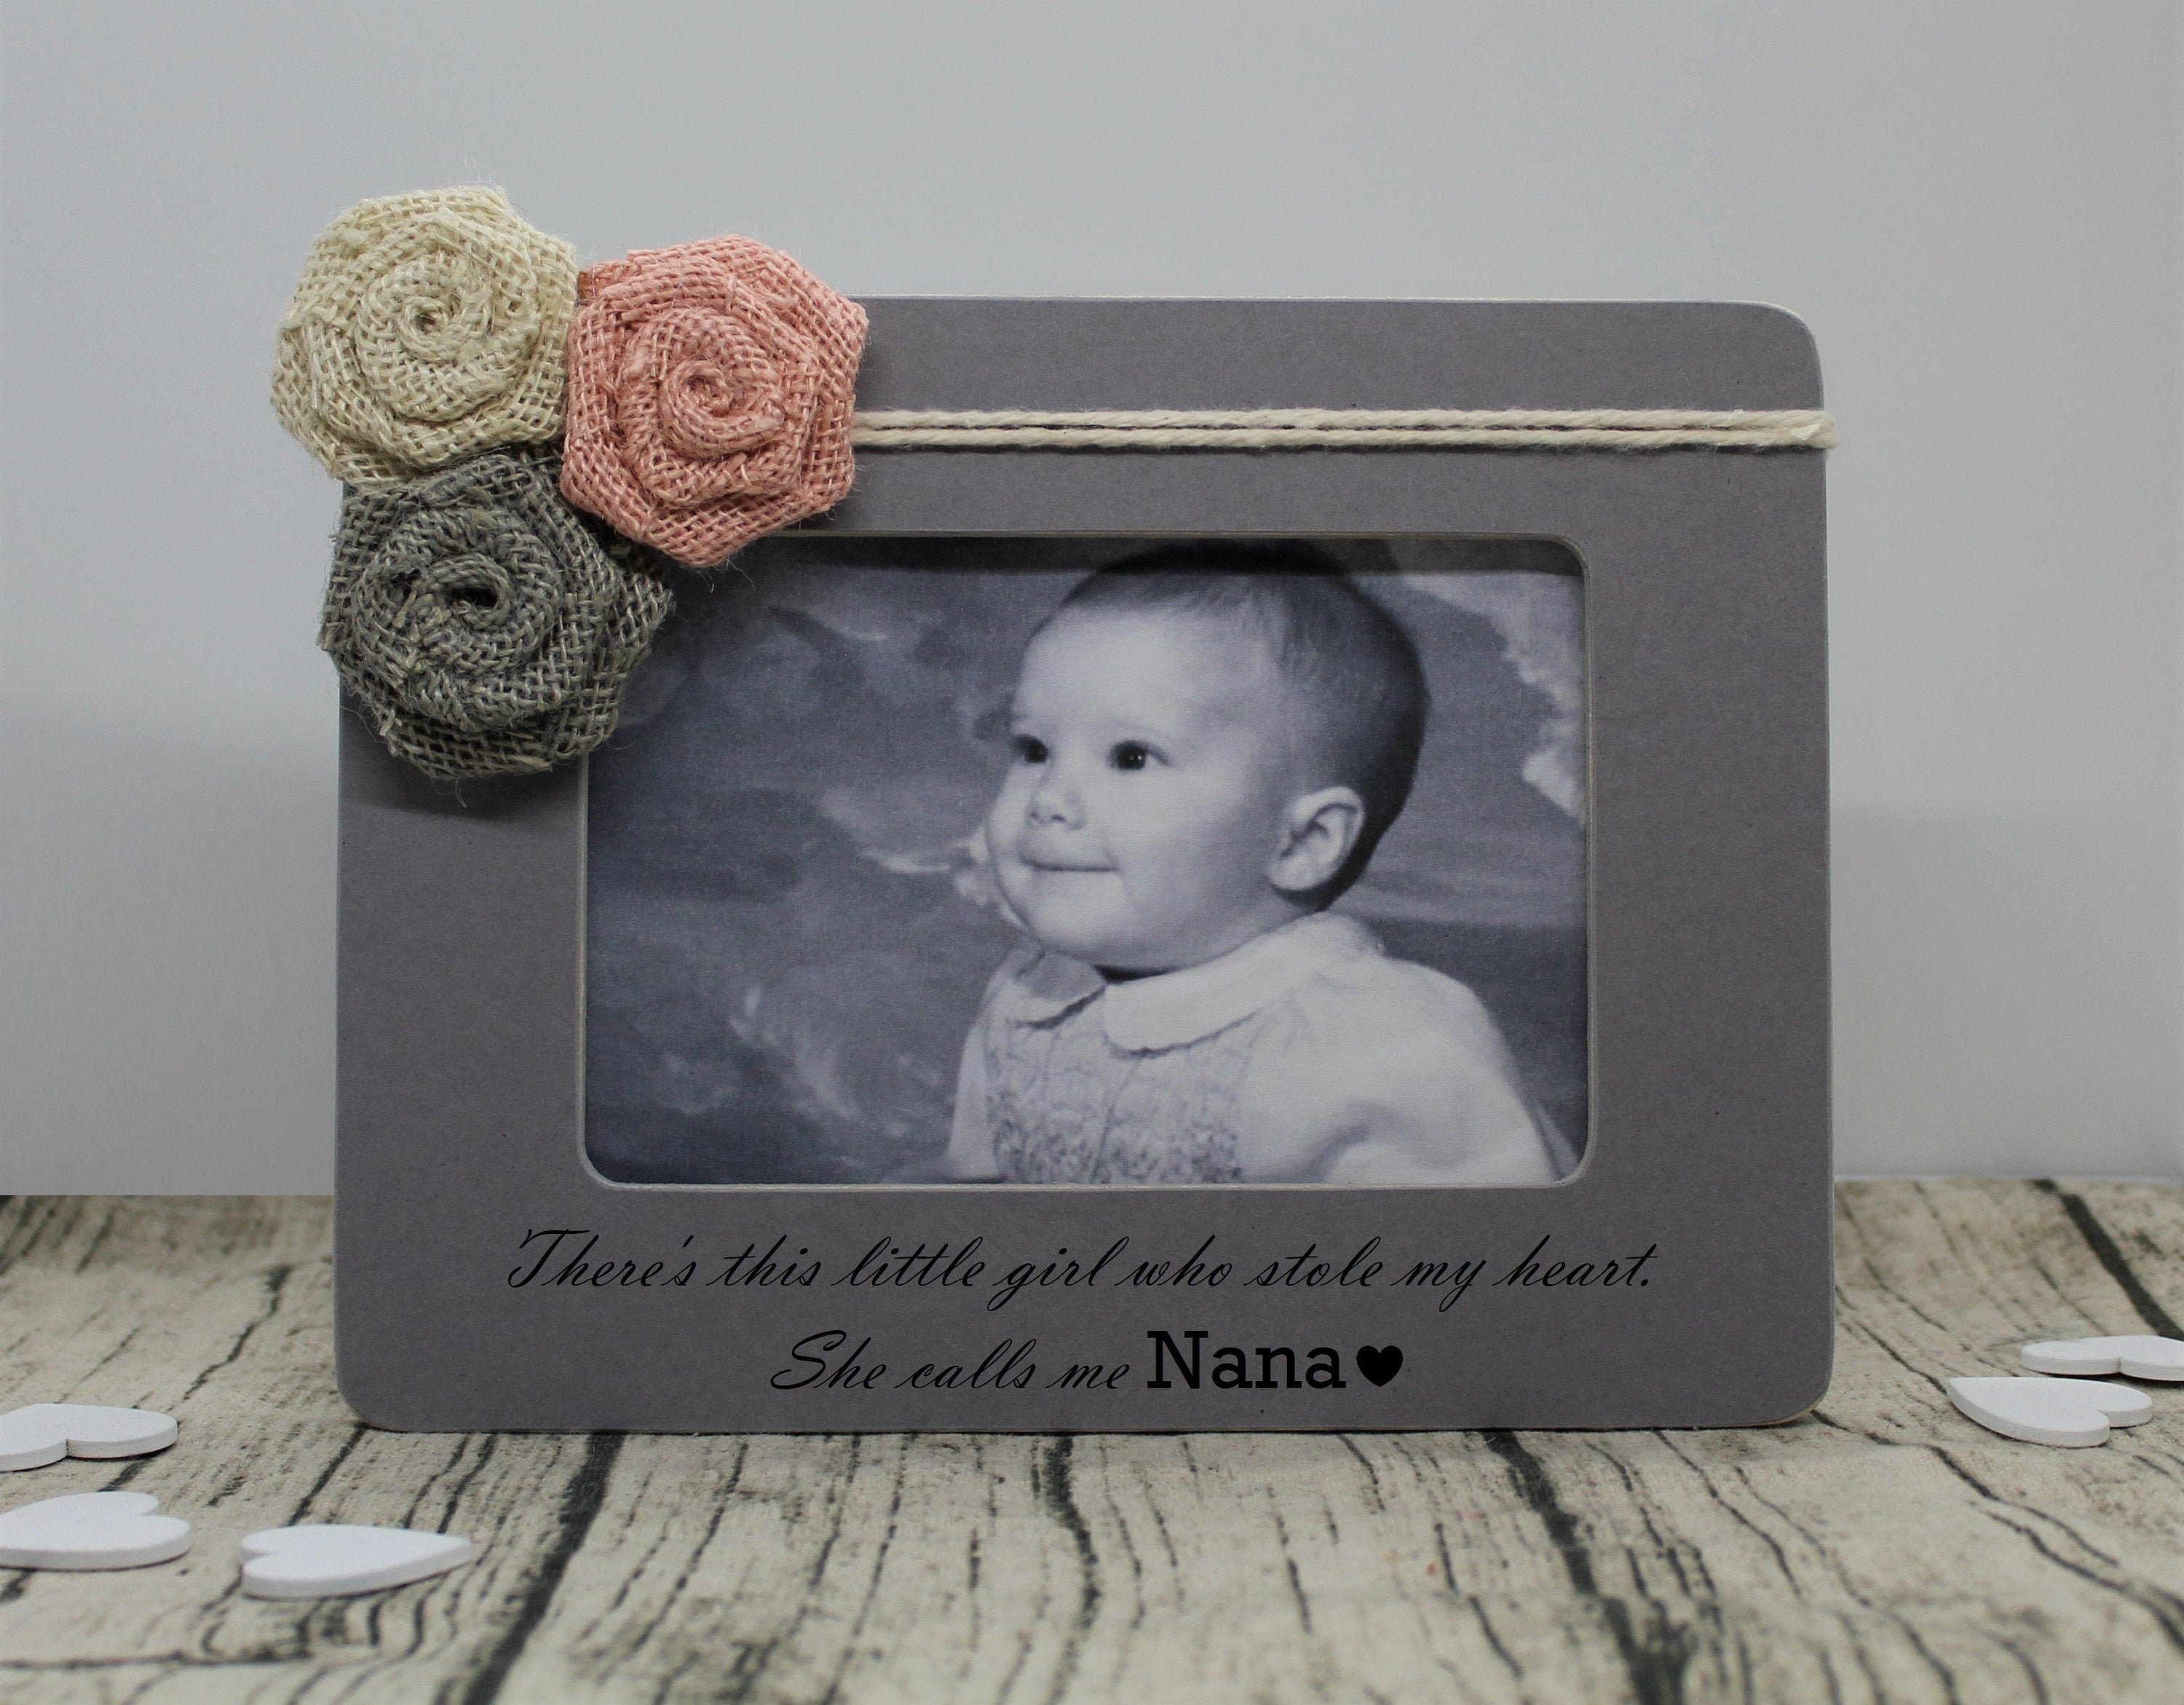 NANA distressed Gray keepsake 5x7/4x6 frame w/mat - Picture Frames, Photo  Albums, Personalized and Engraved Digital Photo Gifts - SendAFrame